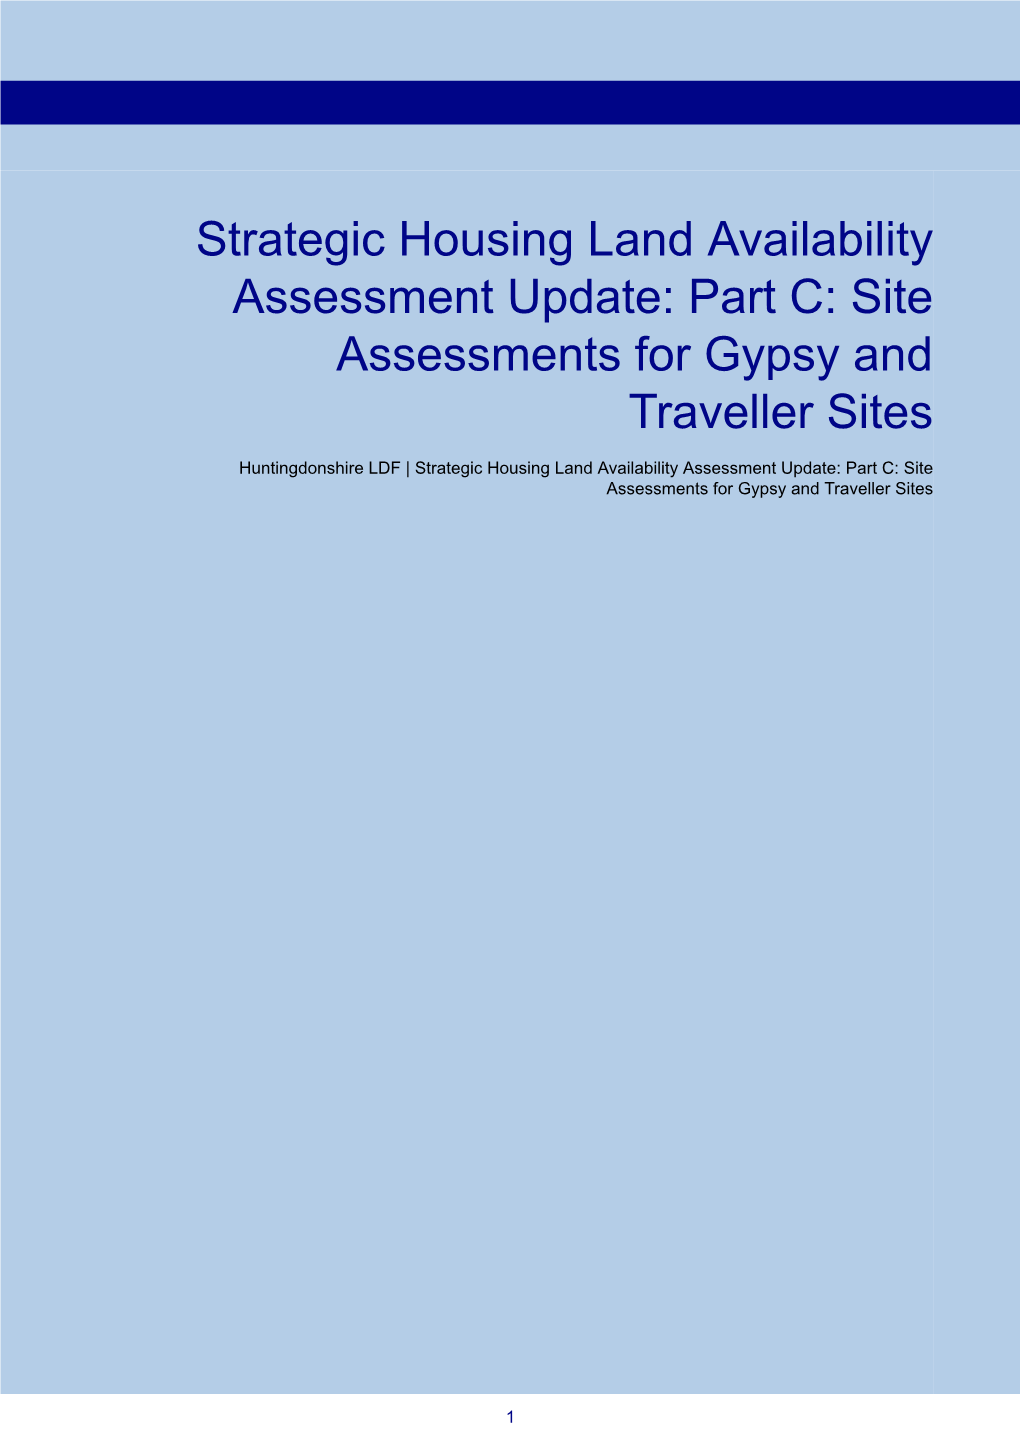 Strategic Housing Land Availability Assessment Update: Part C: Site Assessments for Gypsy and Traveller Sites